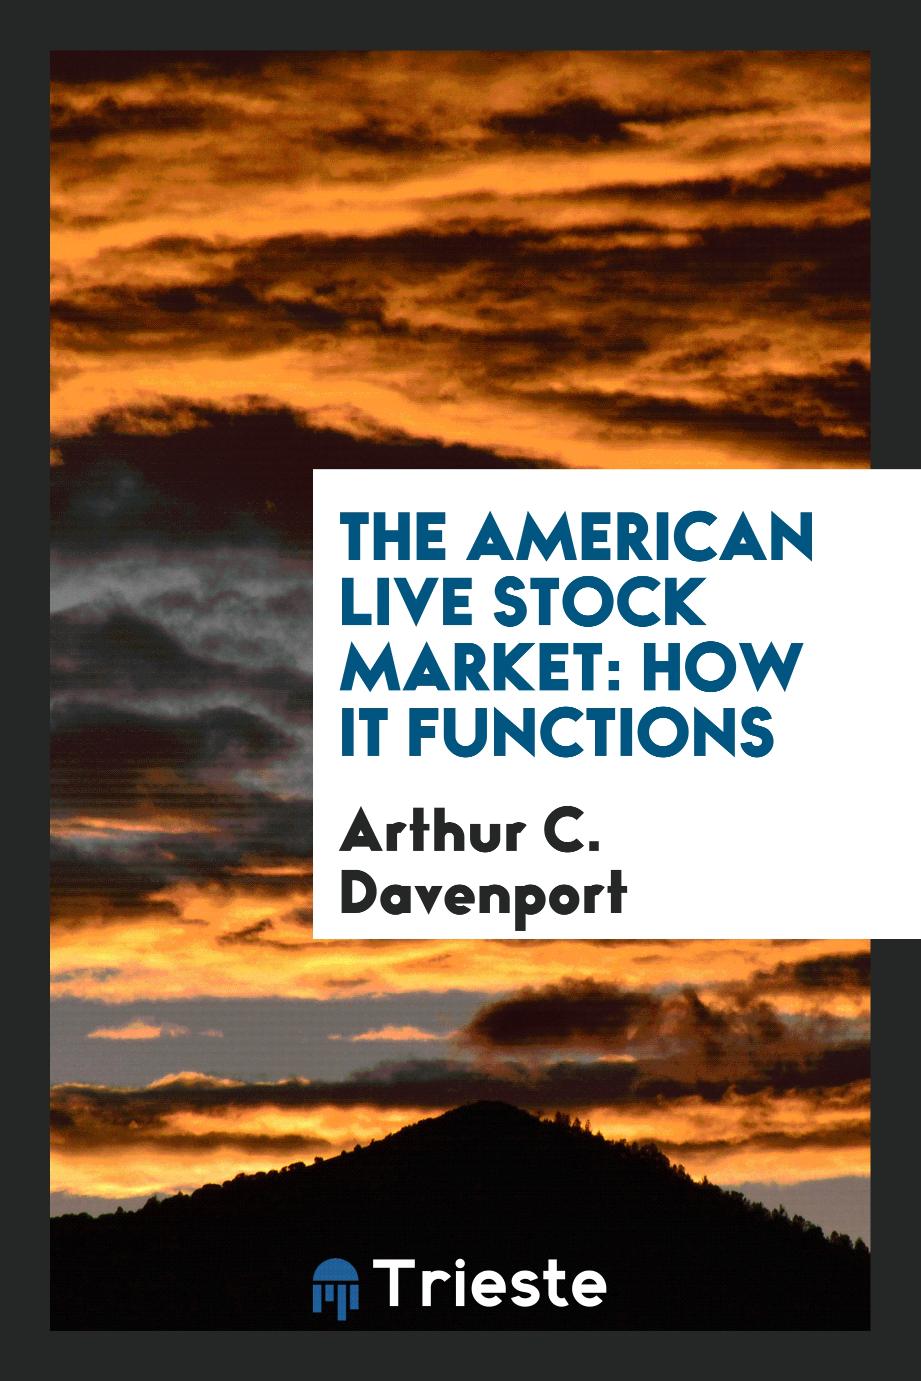 The American Live Stock Market: How it Functions